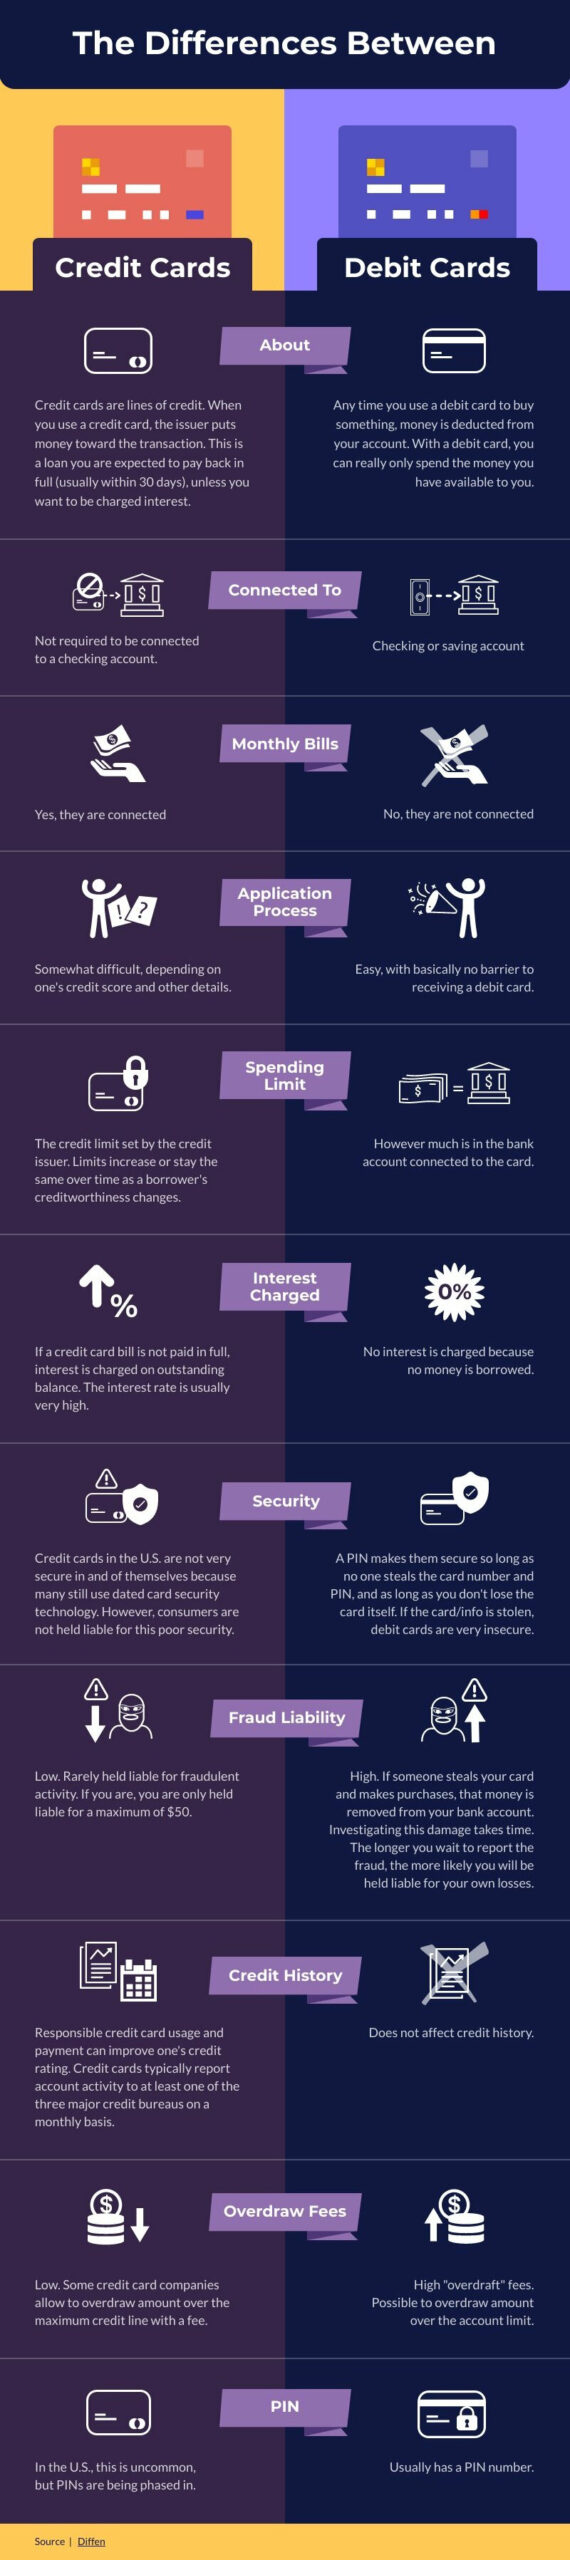 Differences Between Credit Cards and Debit Cards Comparison Infographic Template